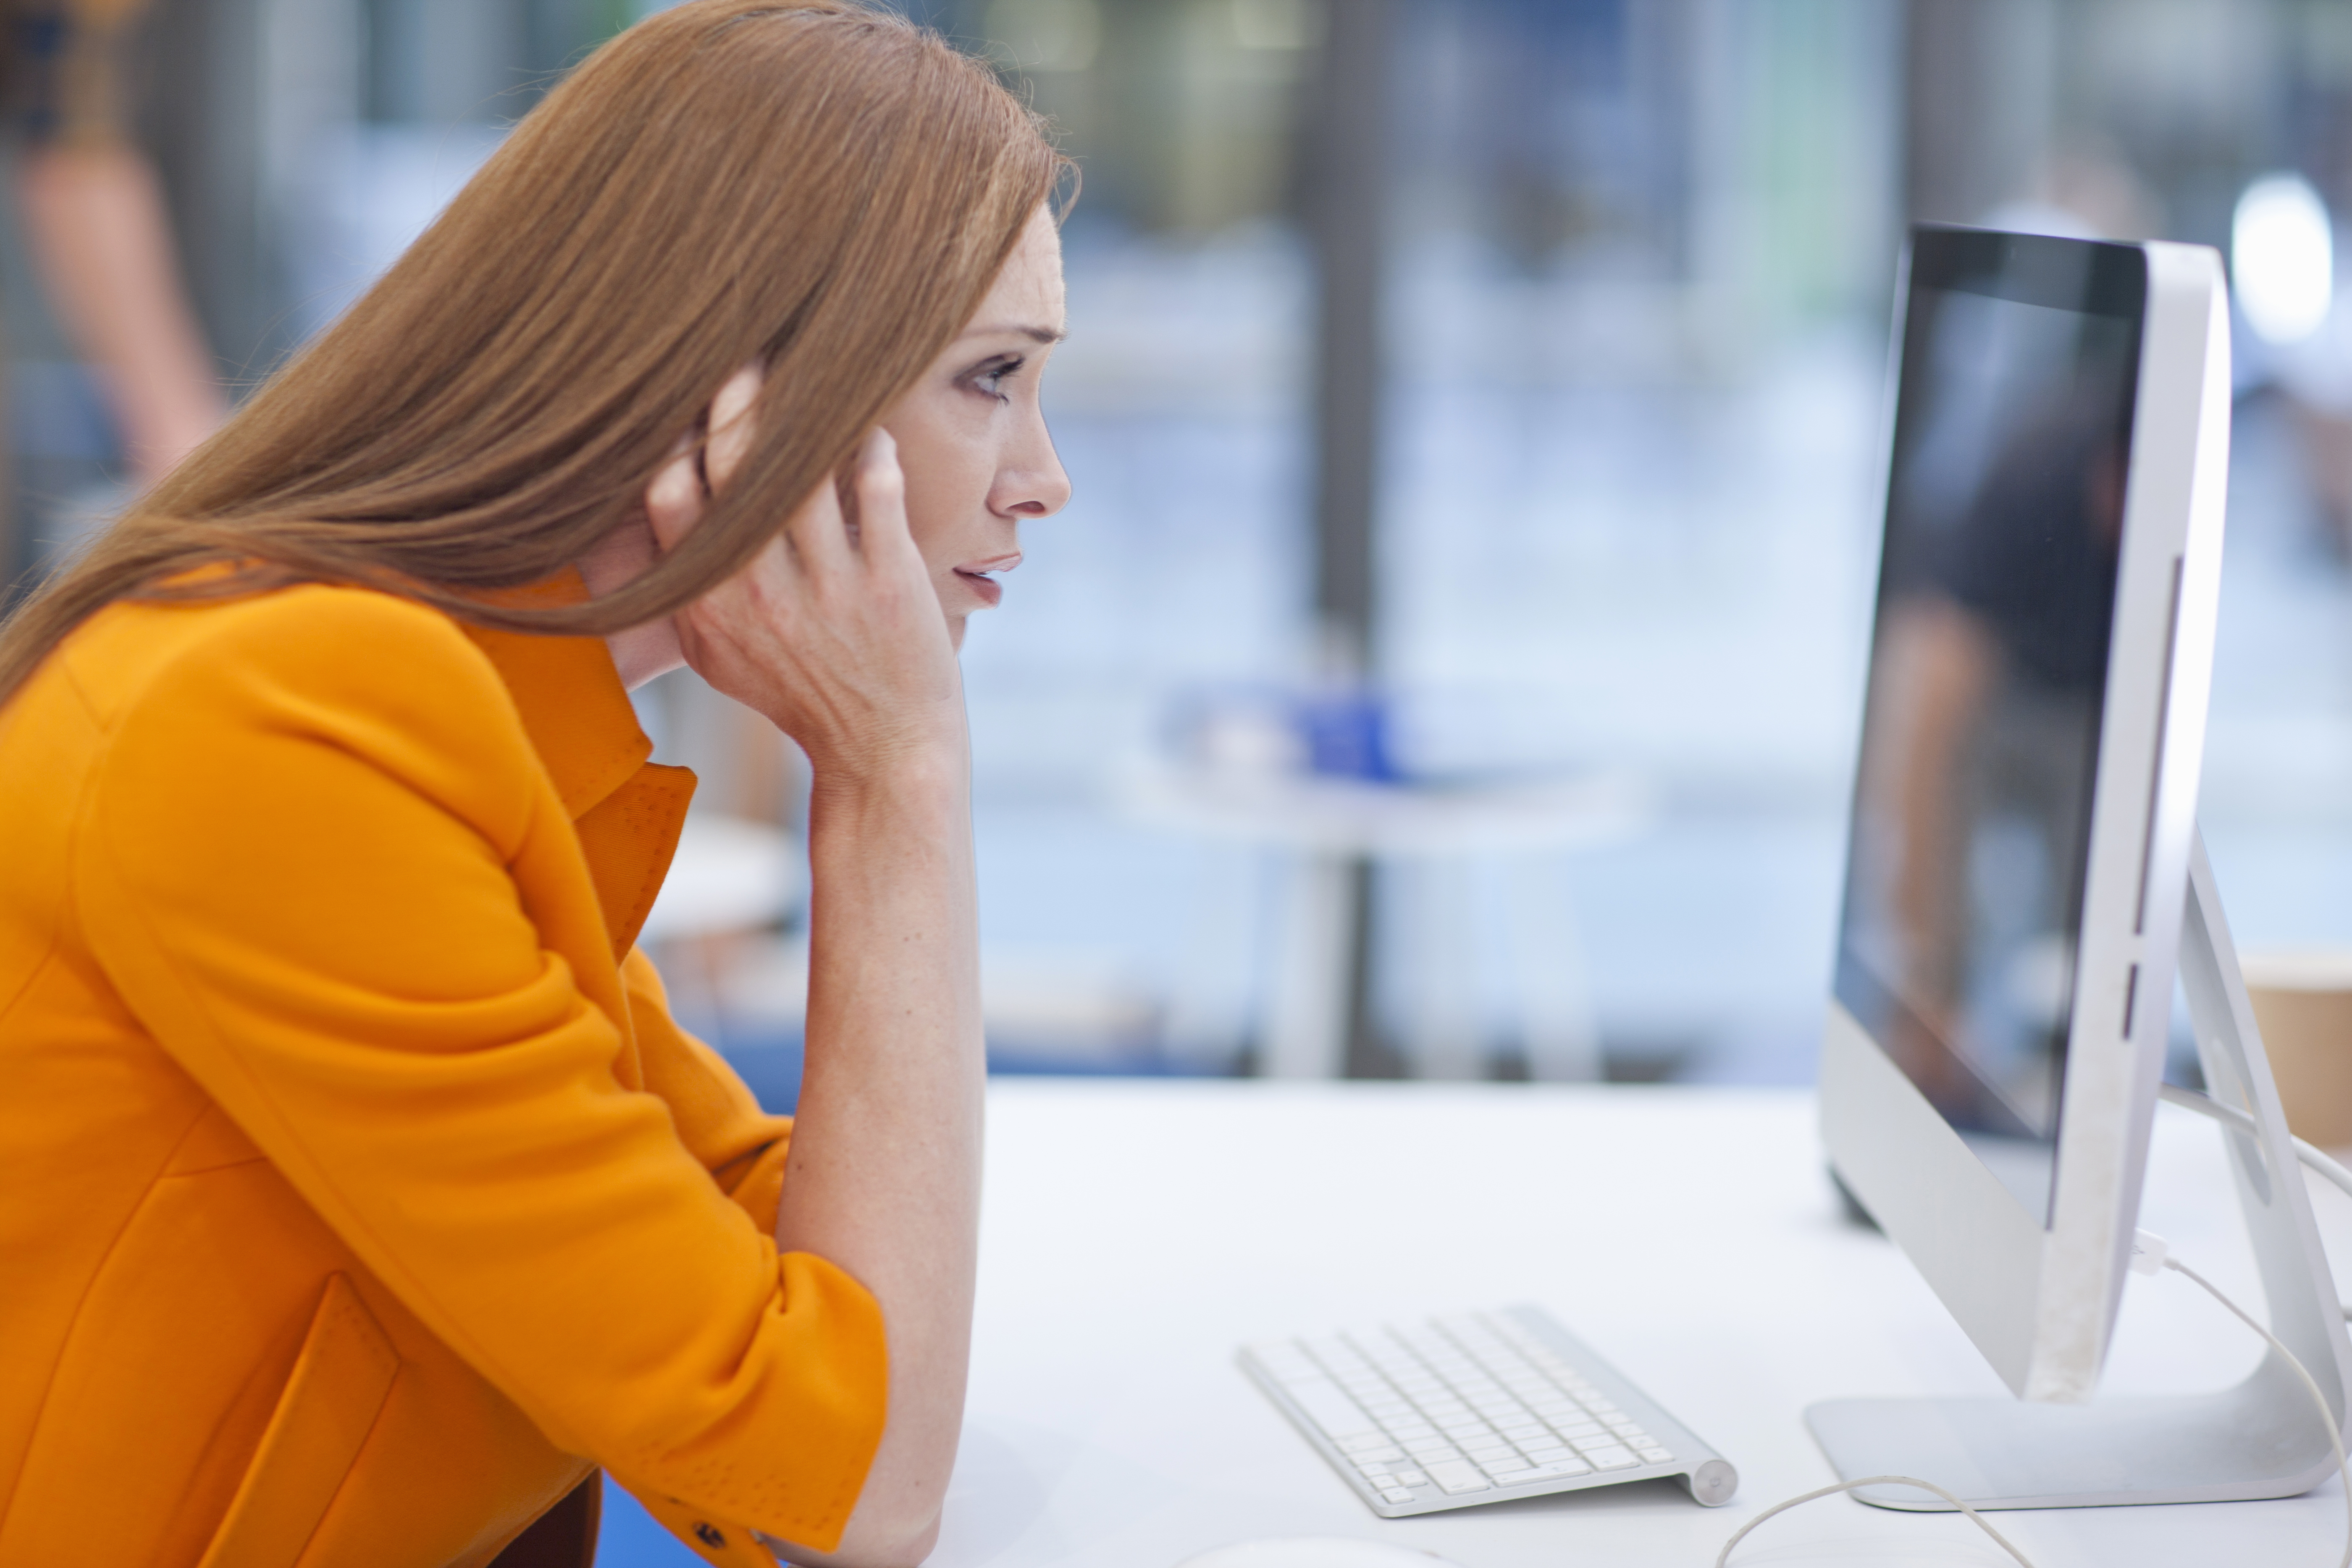 Female office worker staring at computer screen